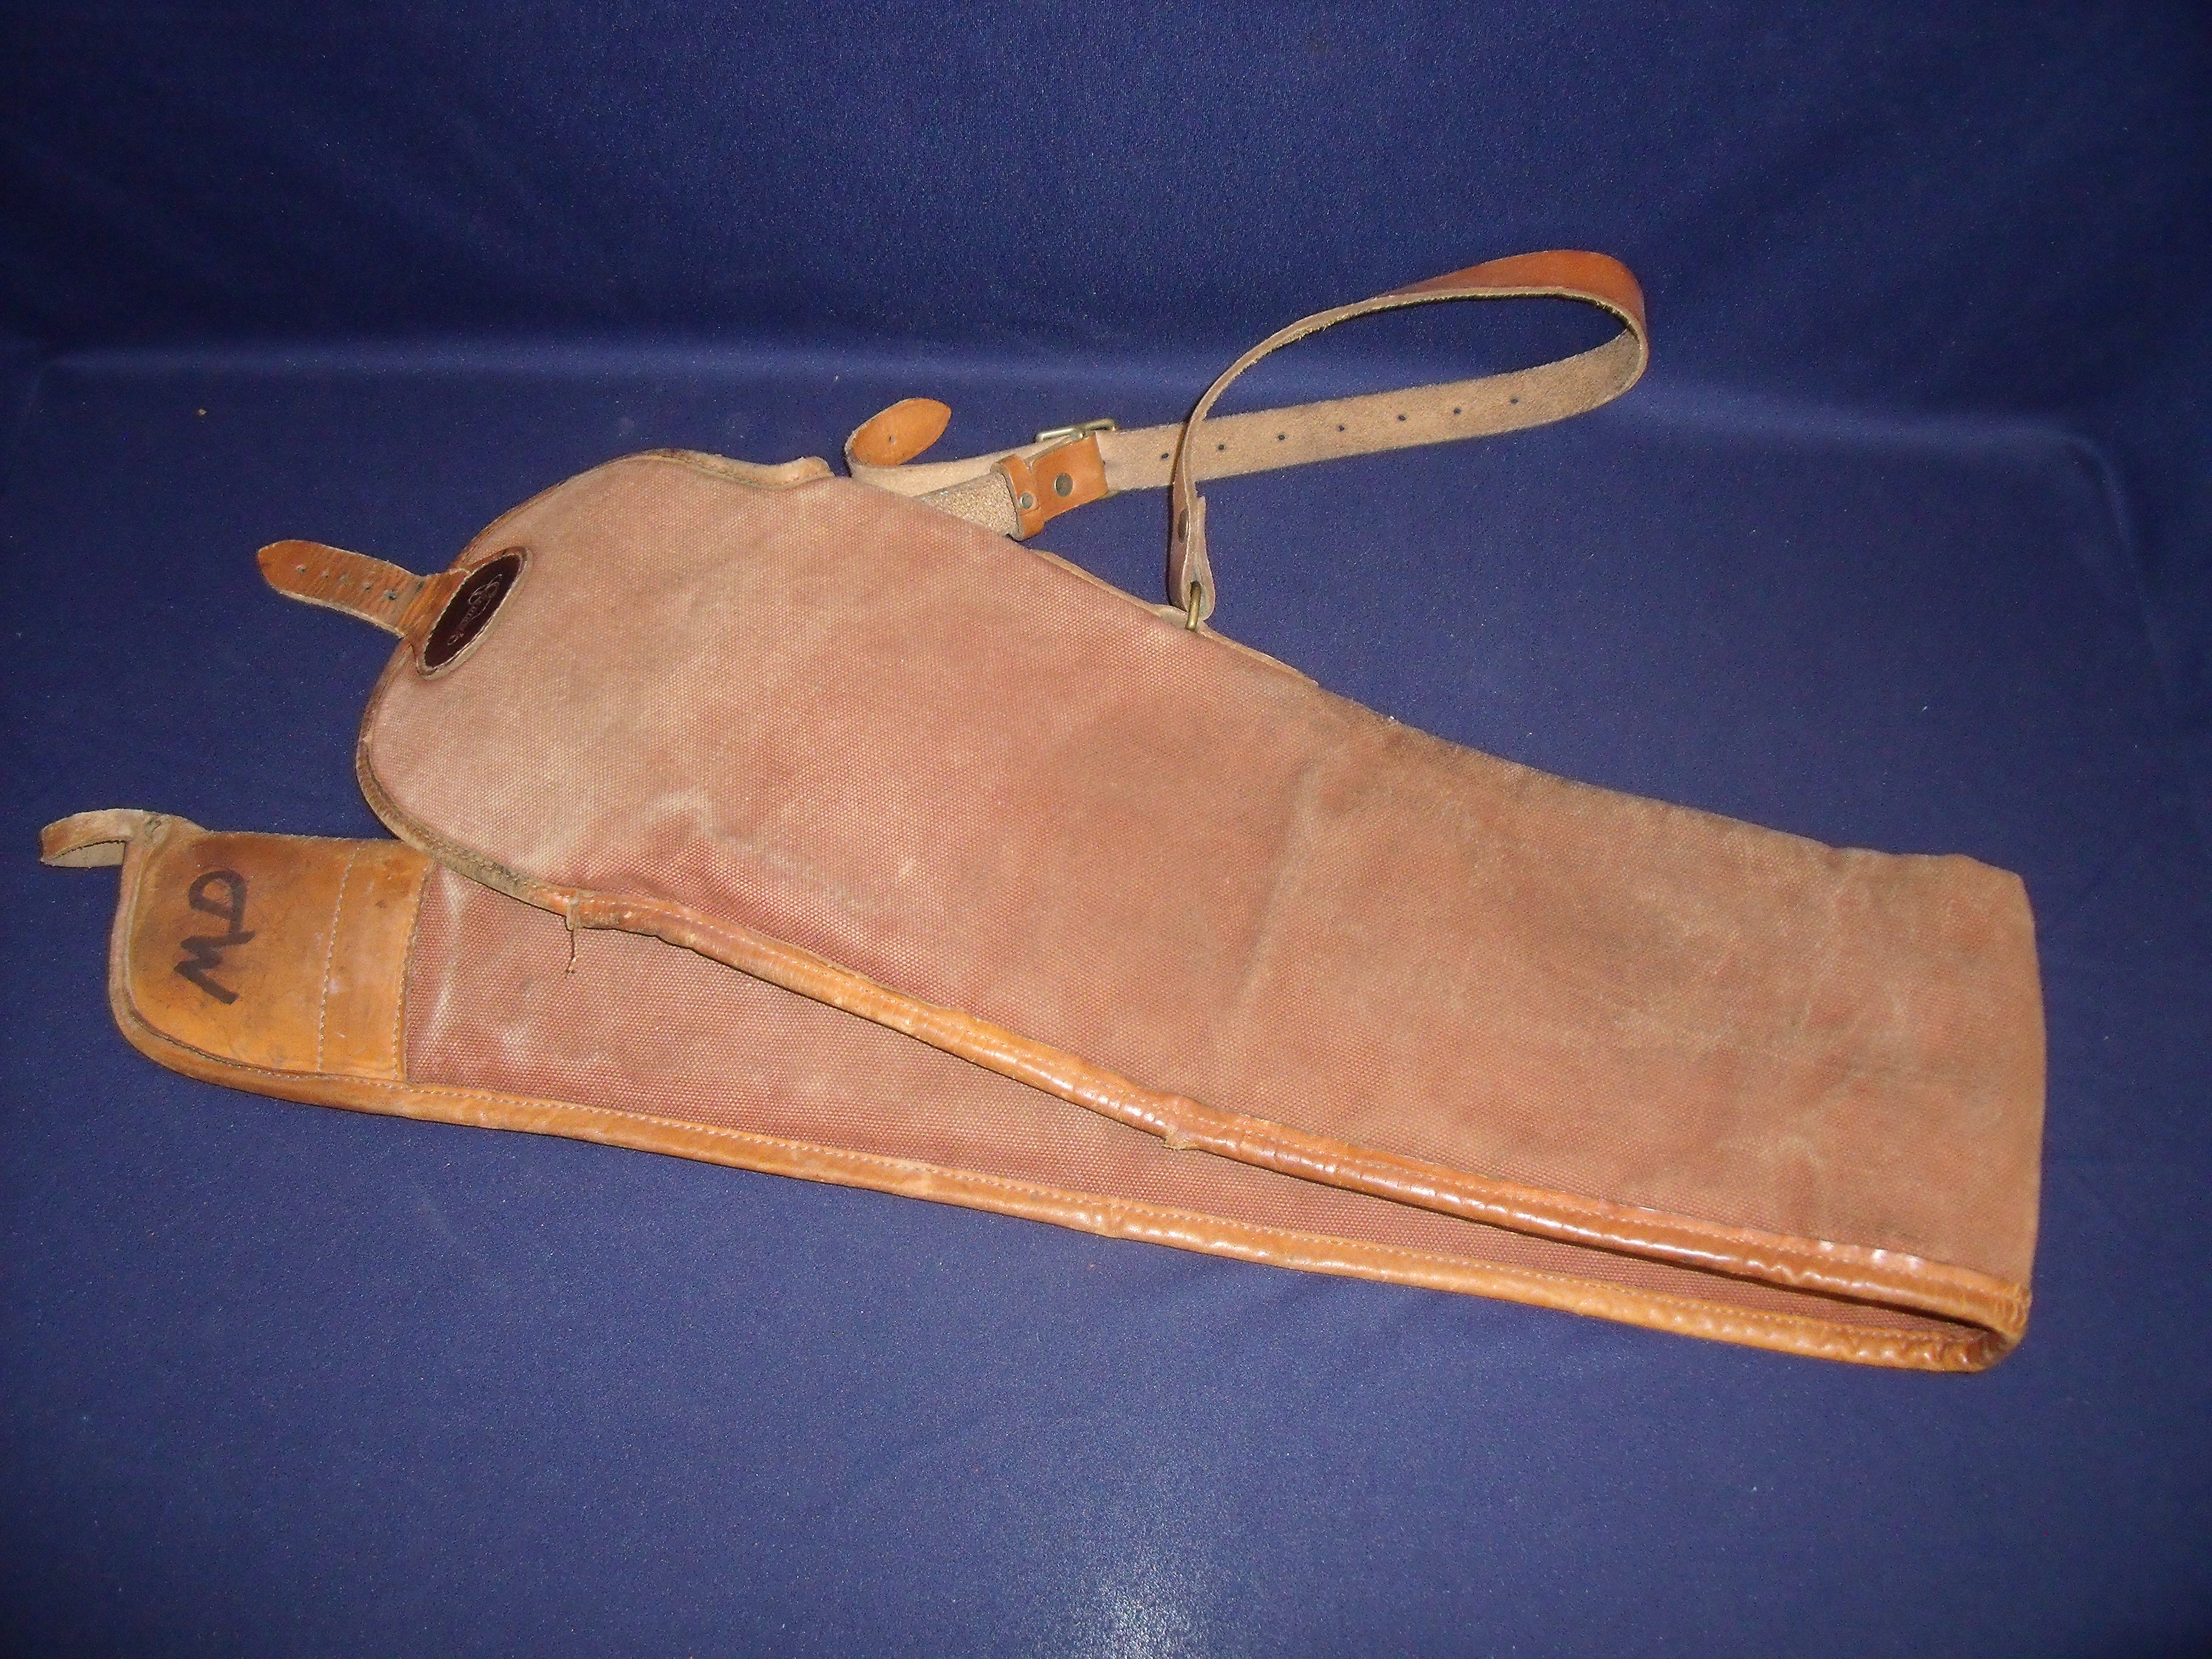 Gunmark canvas and leather bound gun slip with leather shoulder strap and wool lining